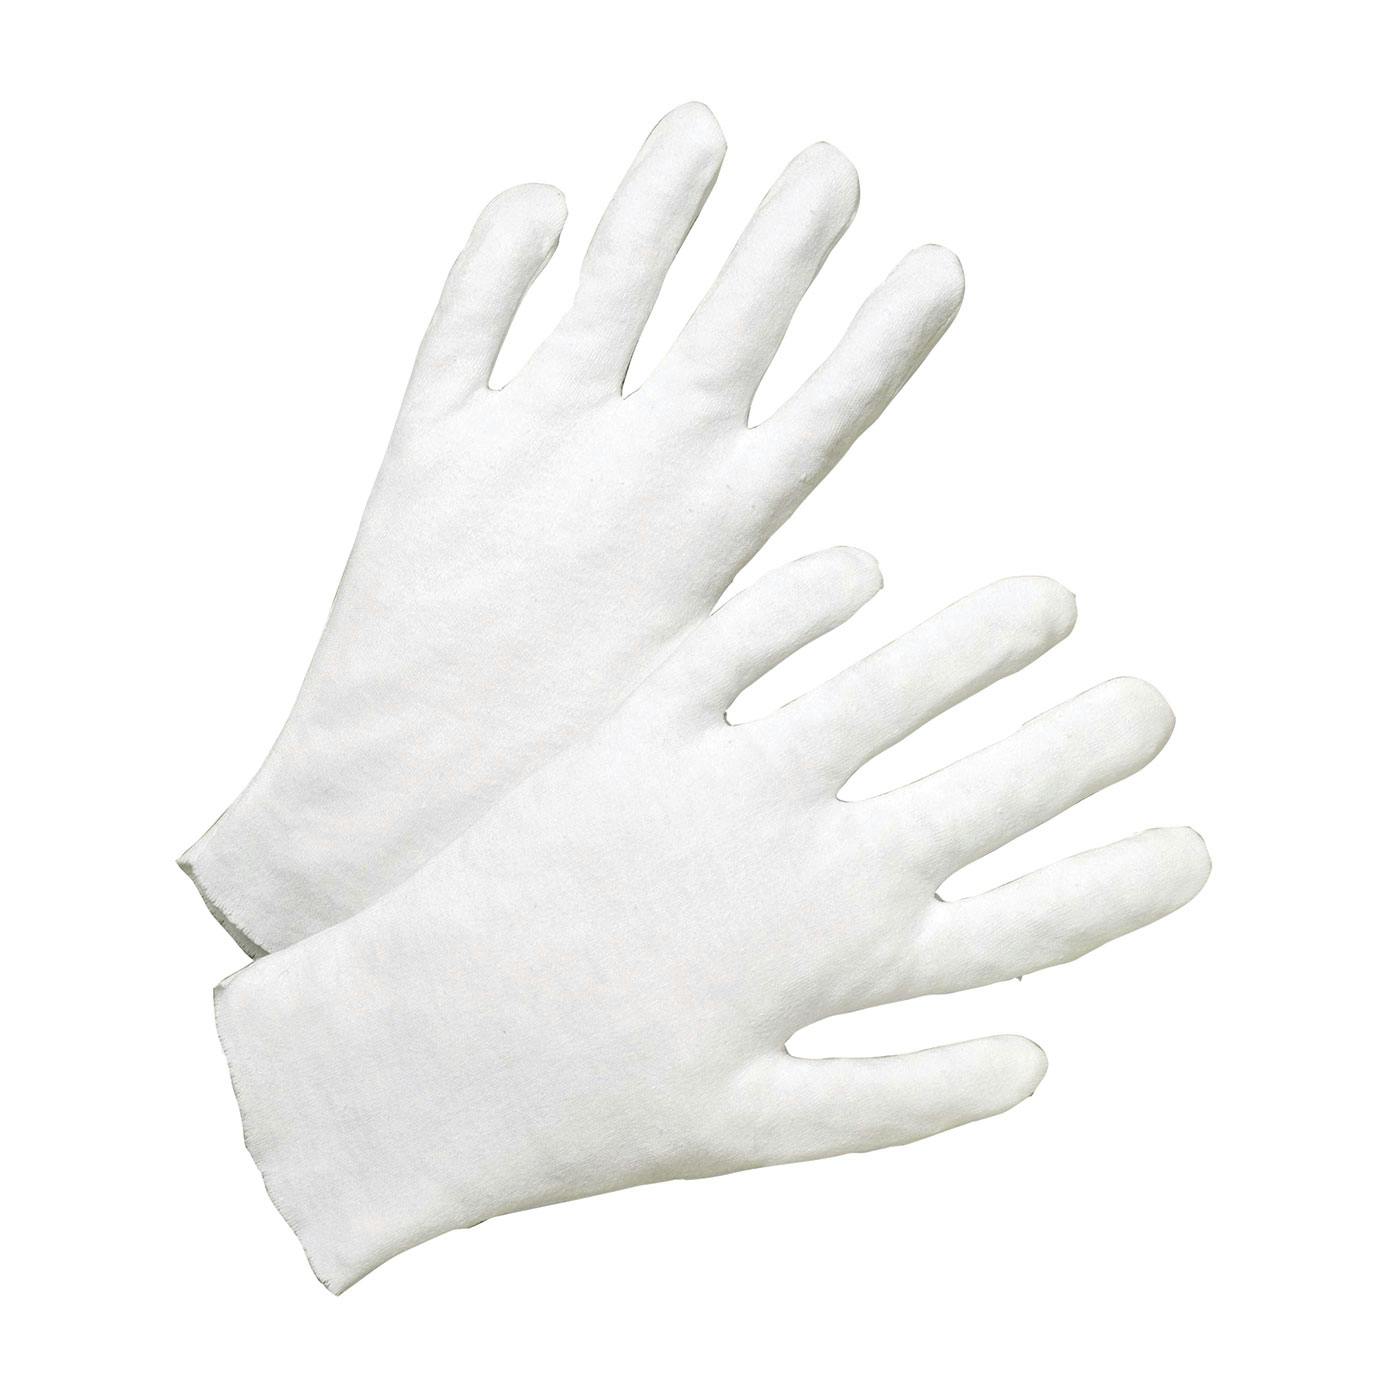 Heavy Weight Cotton Lisle Inspection Glove with Unhemmed Cuff - Ladies', White (805L) - L